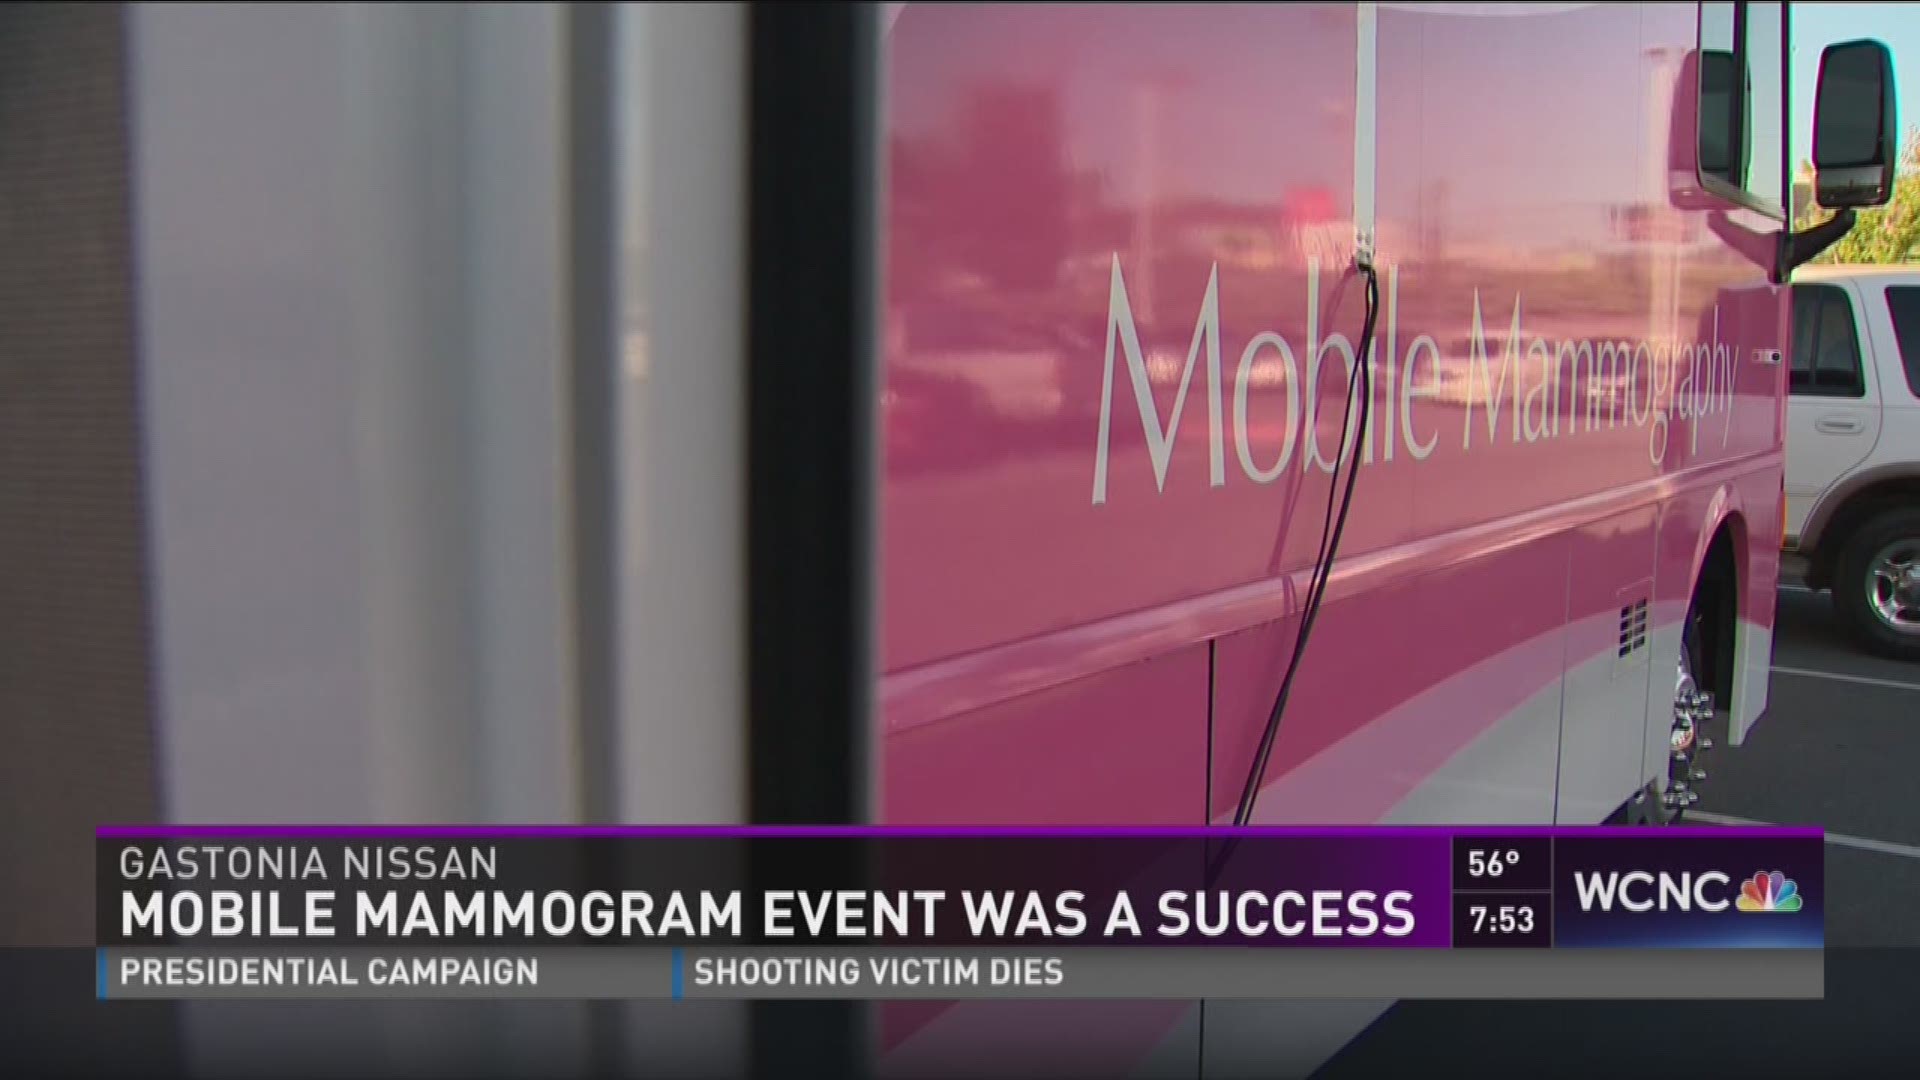 A mobile mammogram event at Gastonia Nissan was a wonderful success with many women receiving breast cancer screenings.